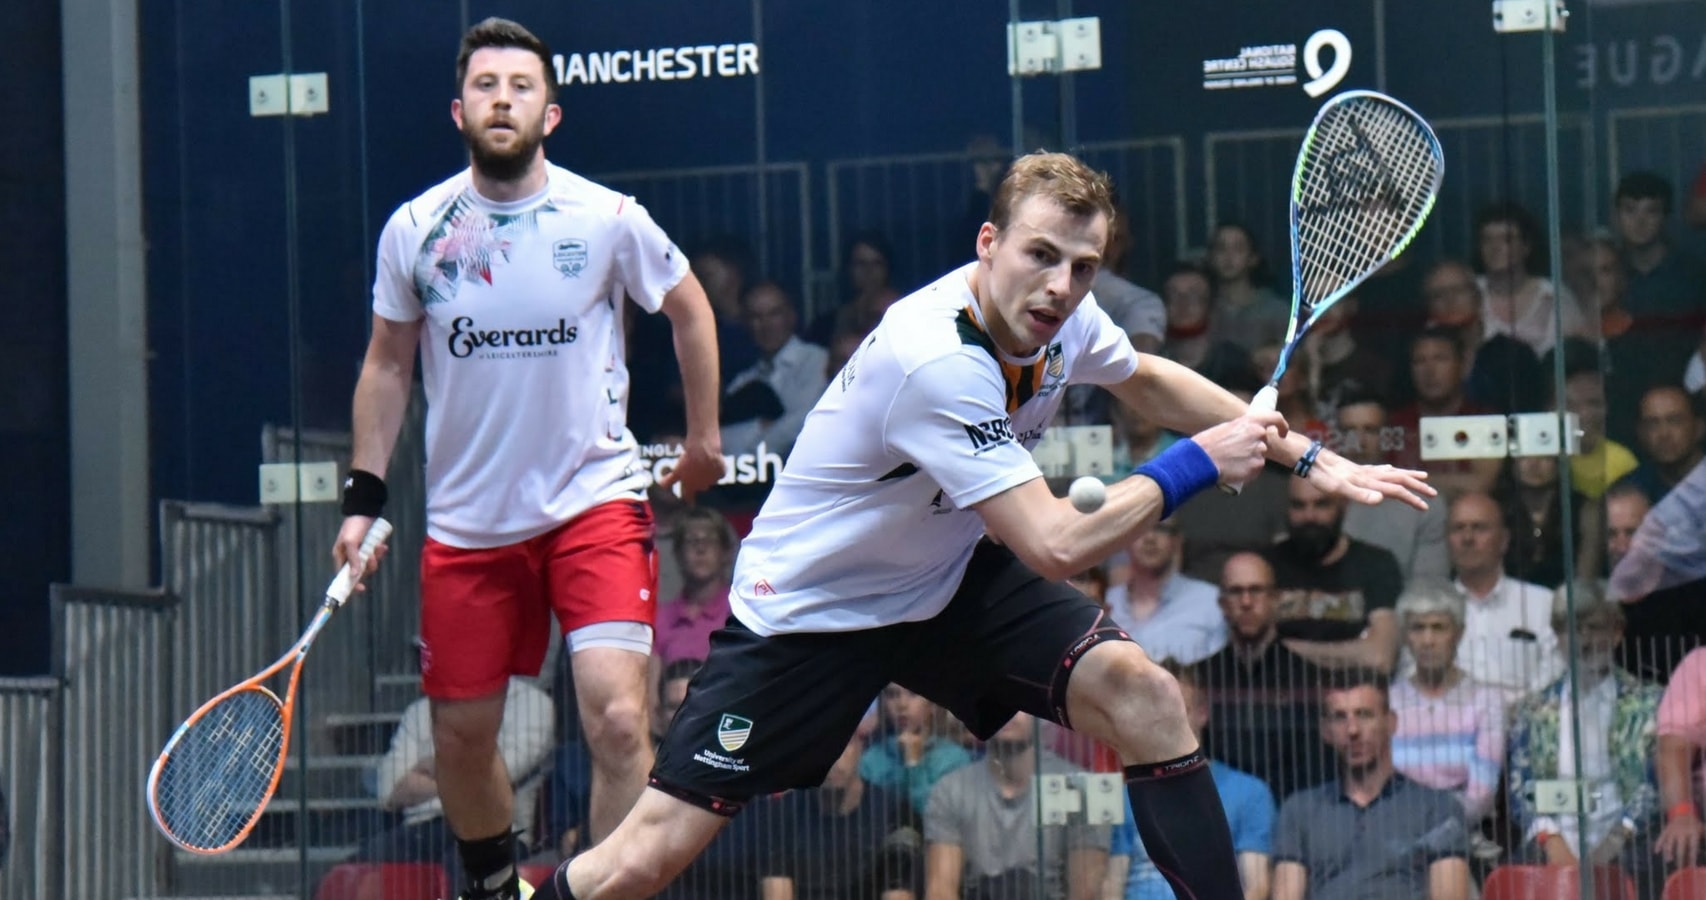 Nick Matthew beat Daryl Selby in an entertaining five-setter as MB Nottingham/University of Nottingham beat Everards Leicester 5-0 in last year's final in Manchester